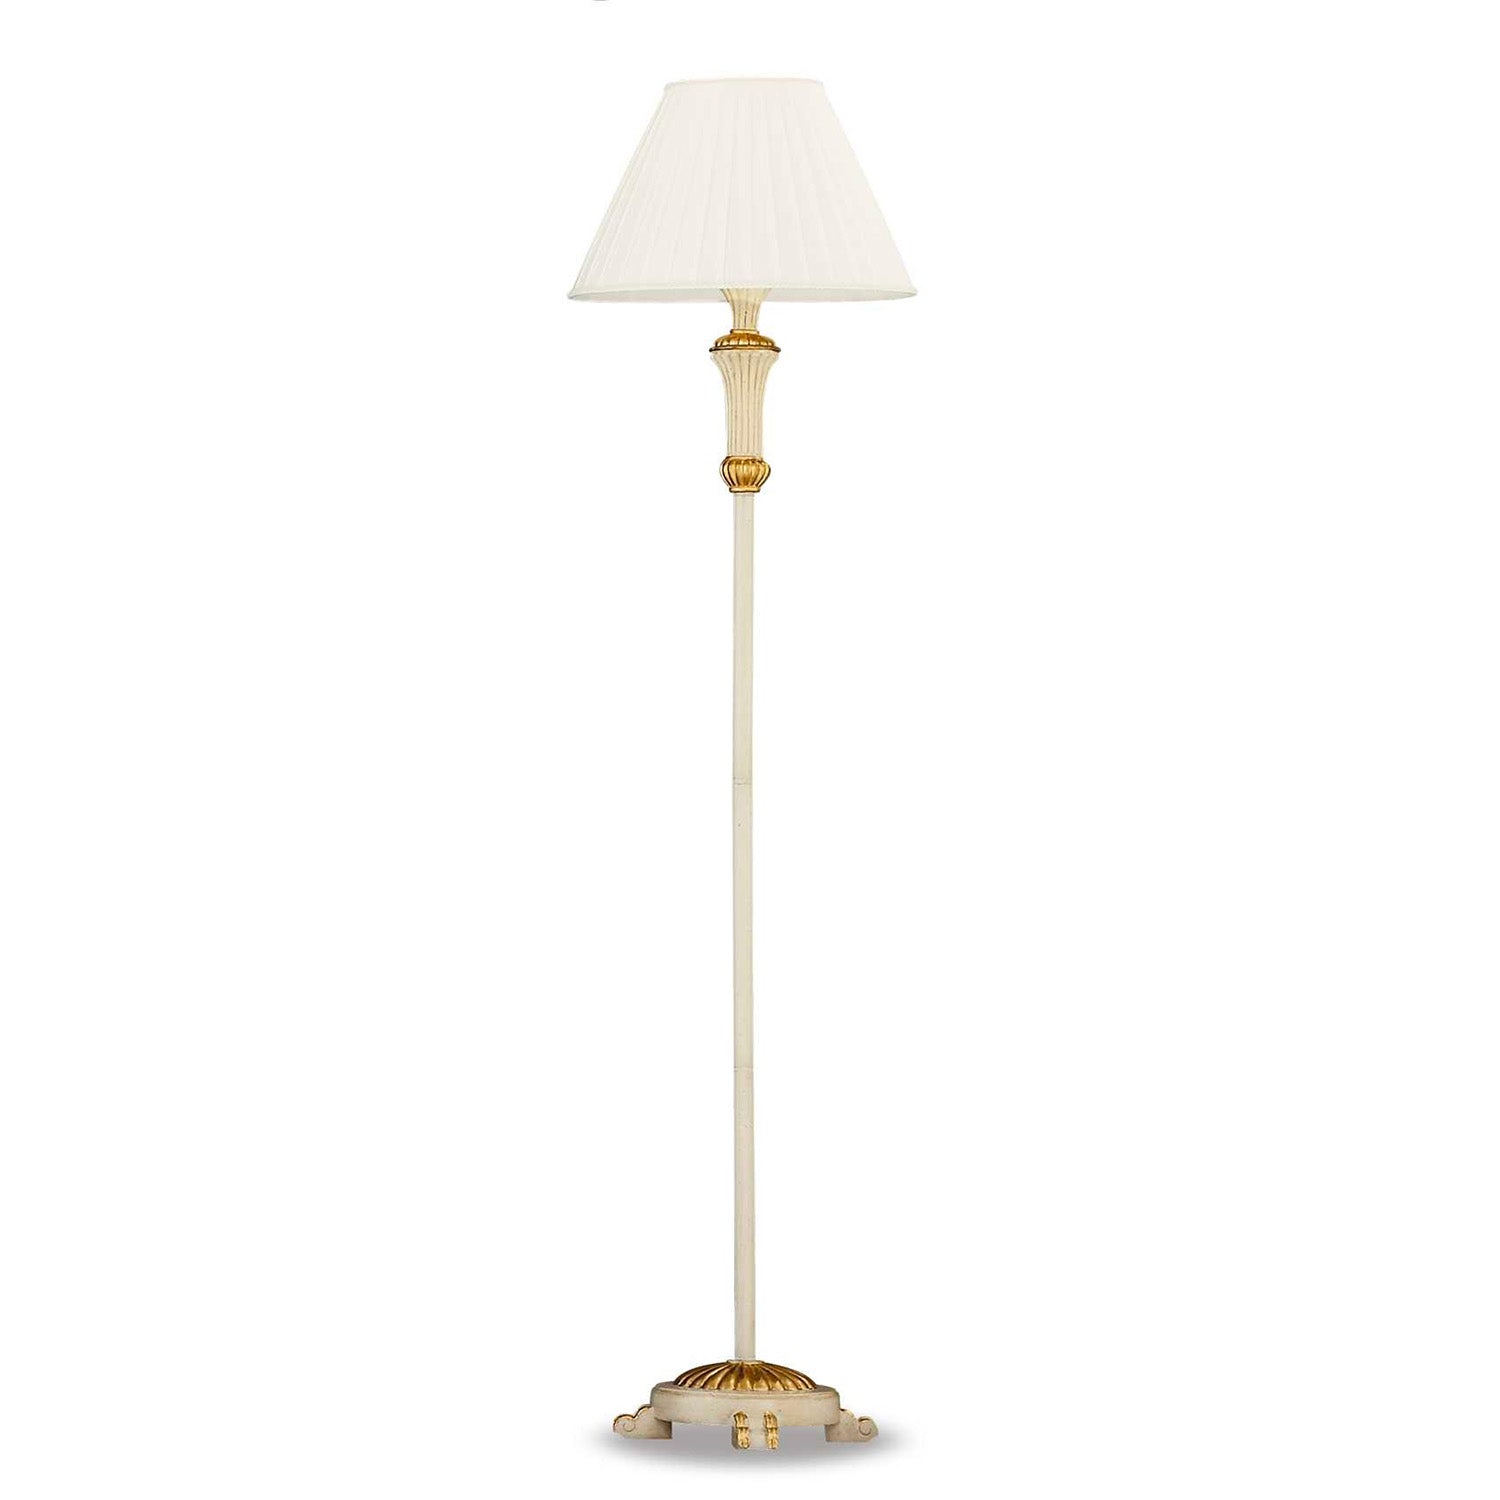 FIRENZE - Antique gold leaf floor lamp with aged effect